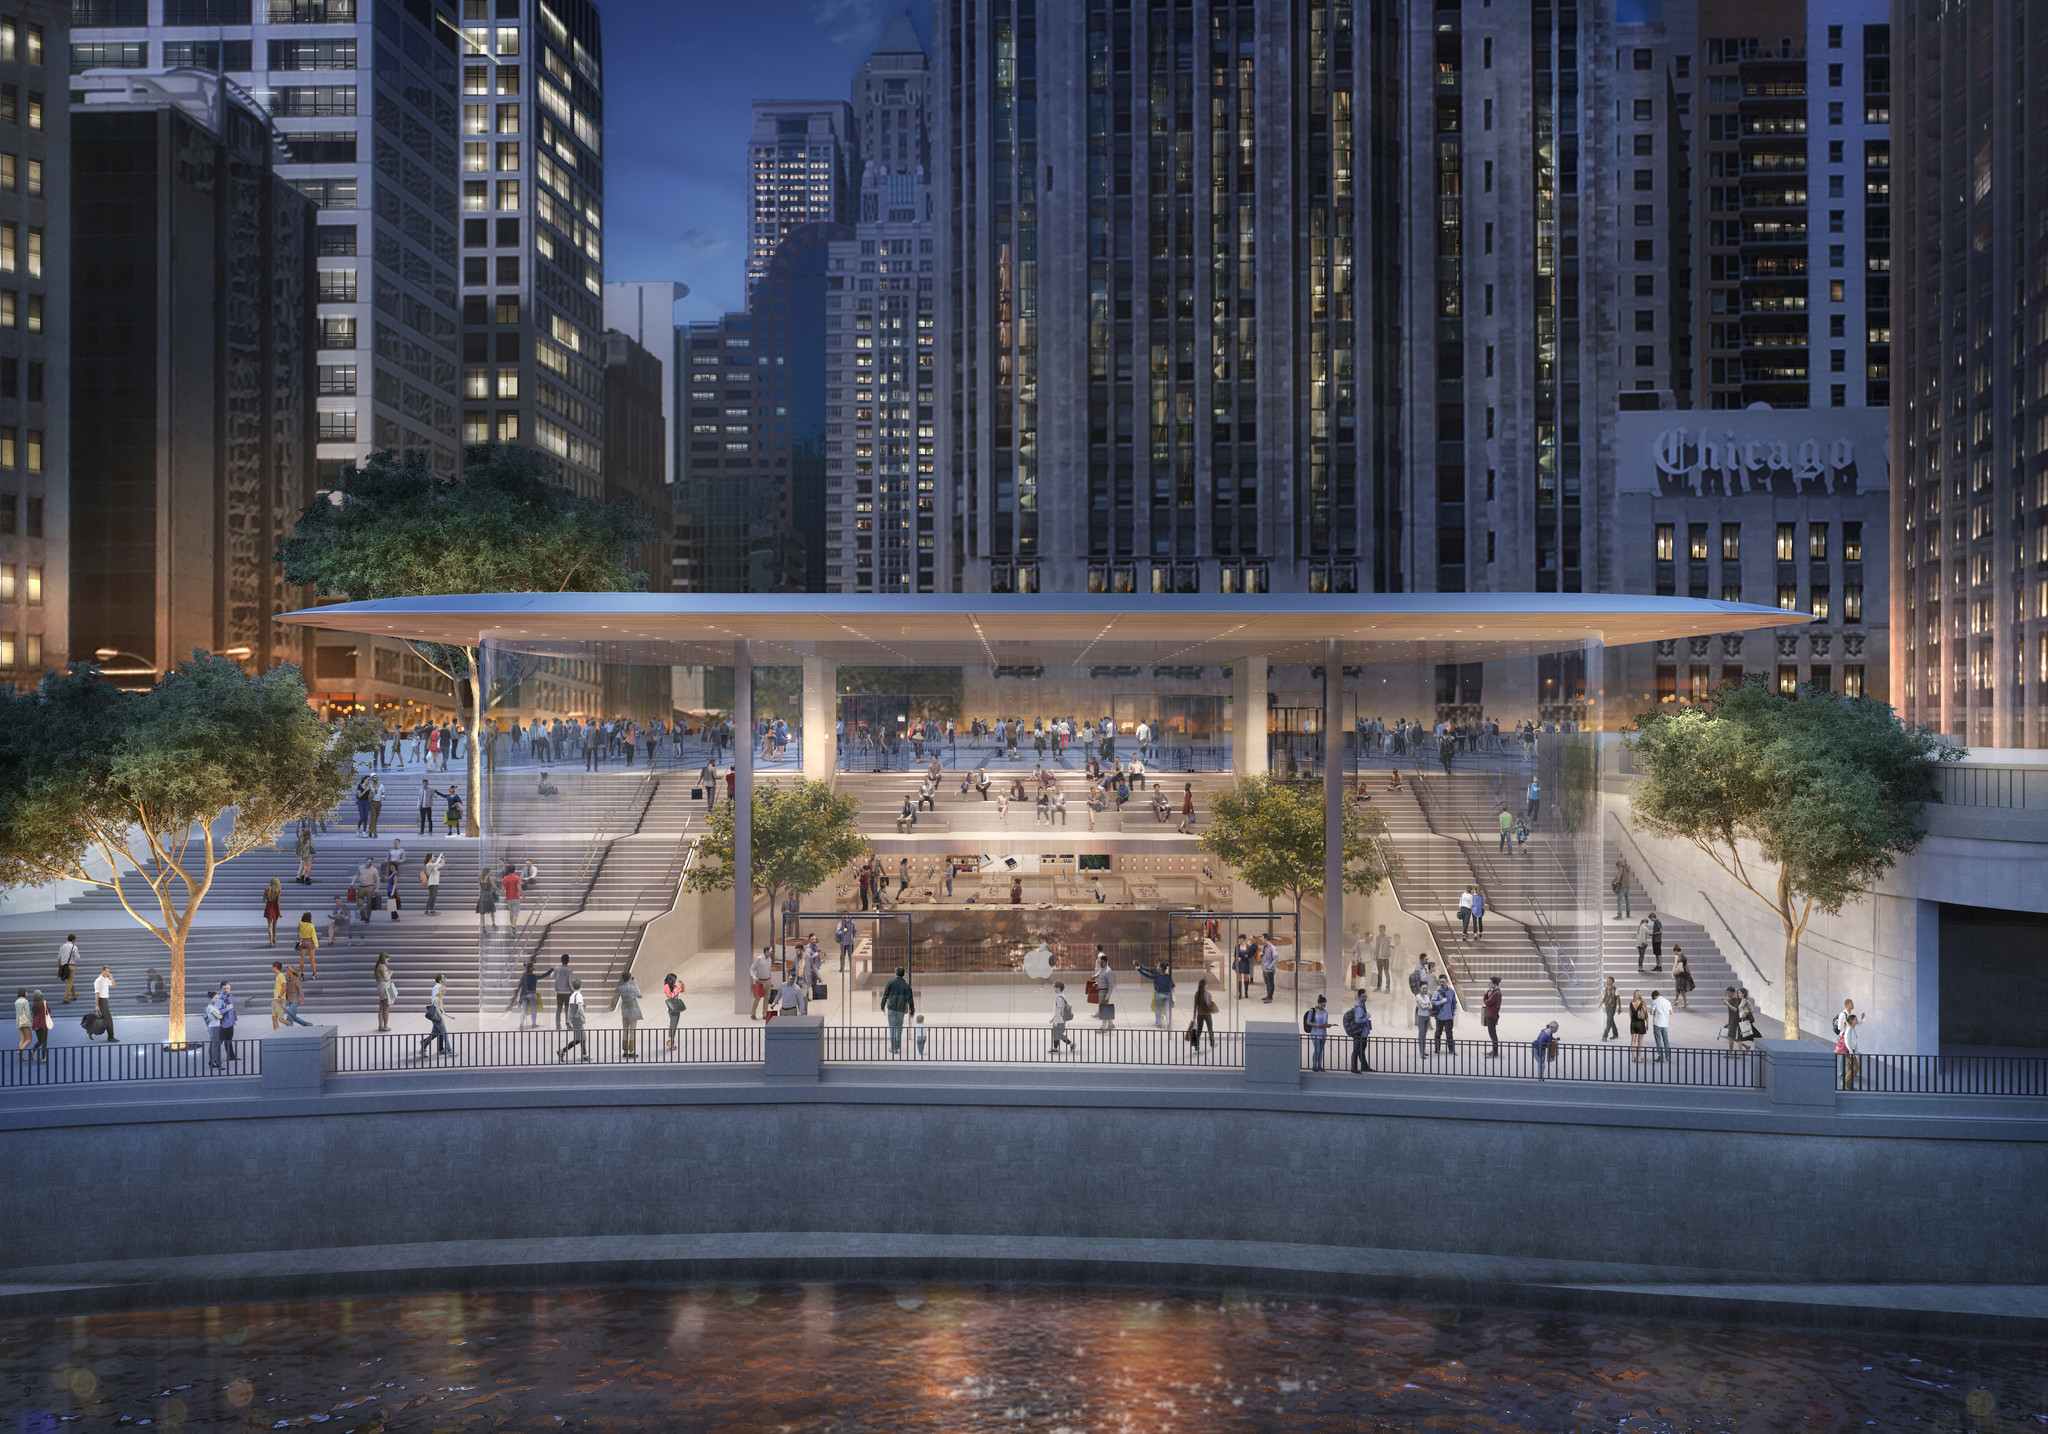 New Apple store under construction on Chicago River - Chicago Tribune